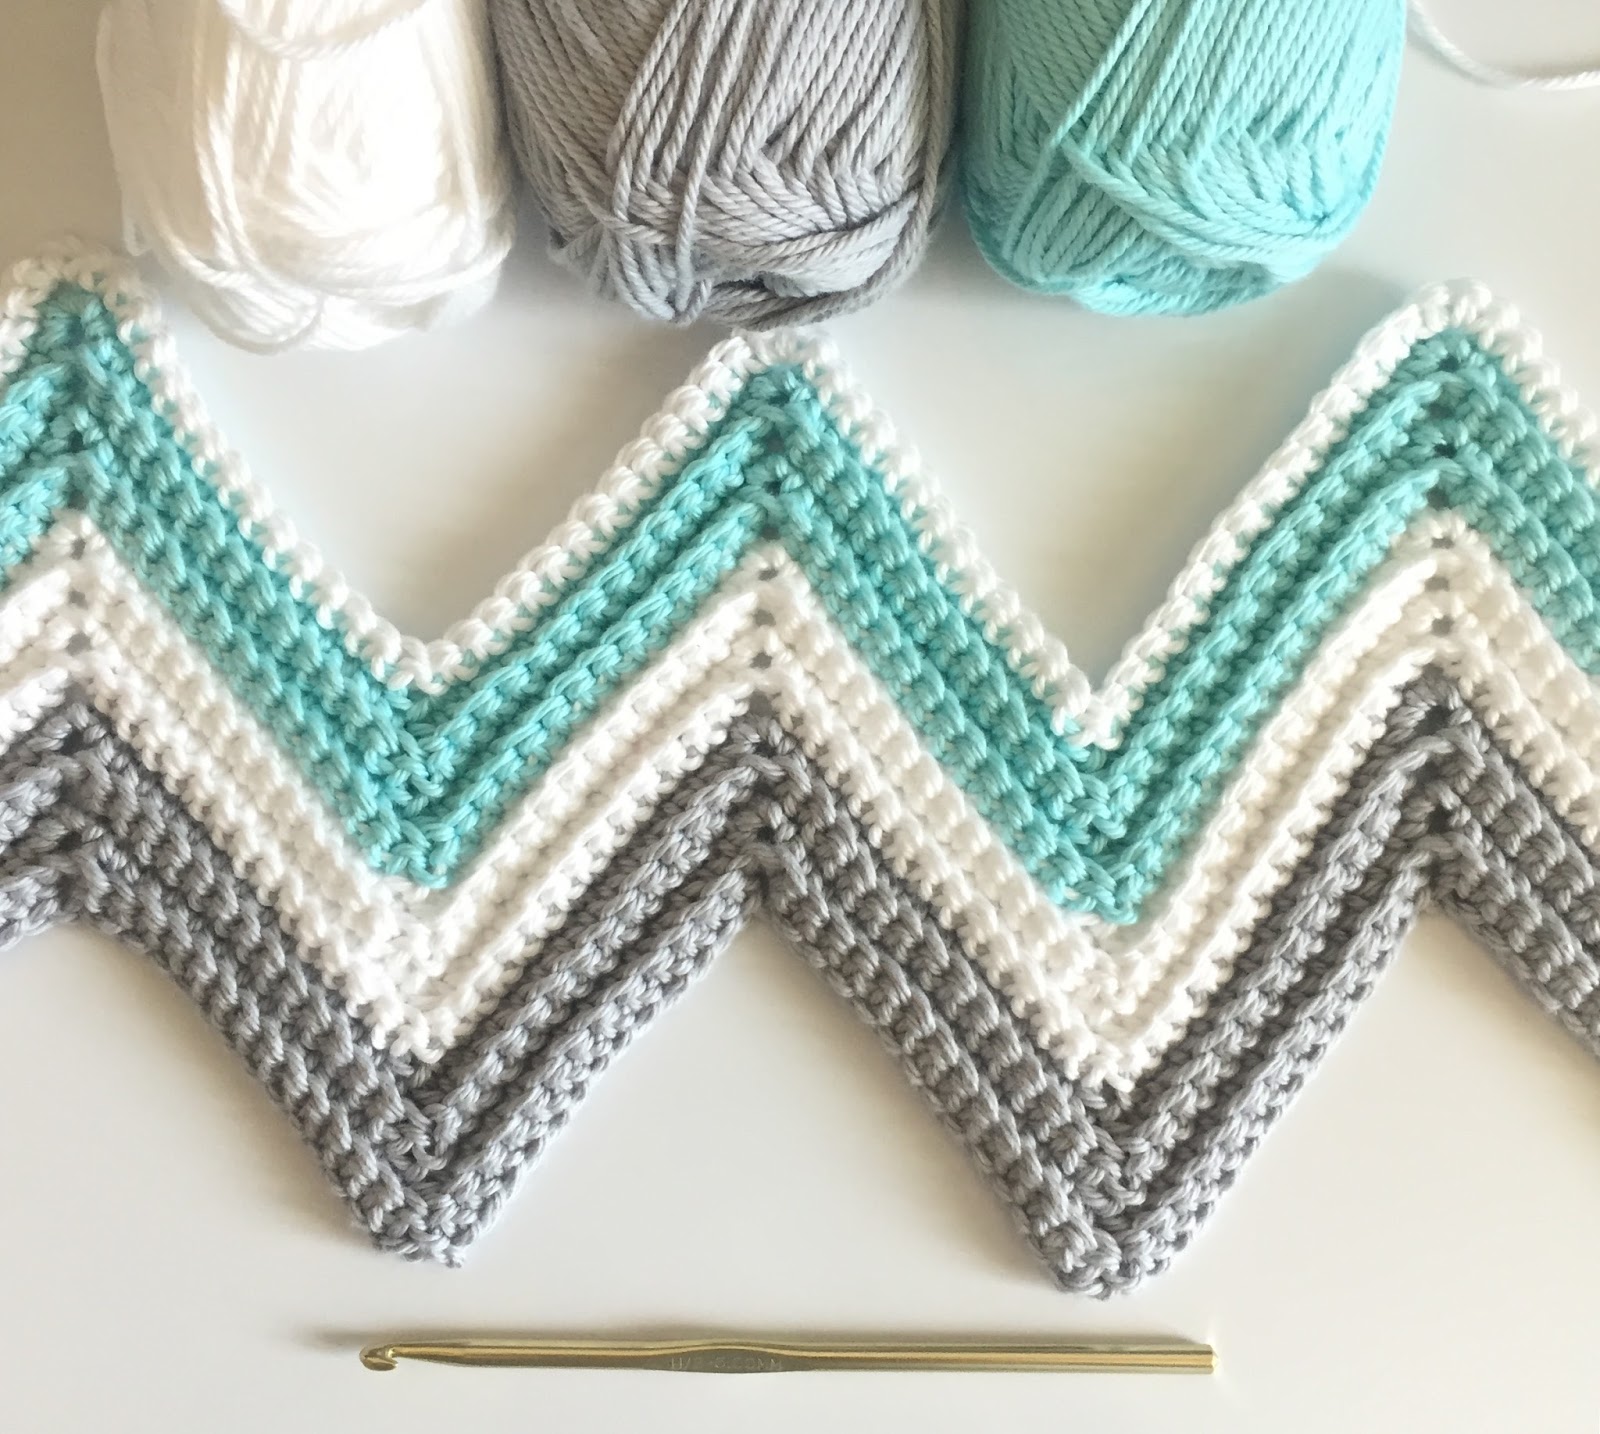 Image shows a crocheted chevron pattern.